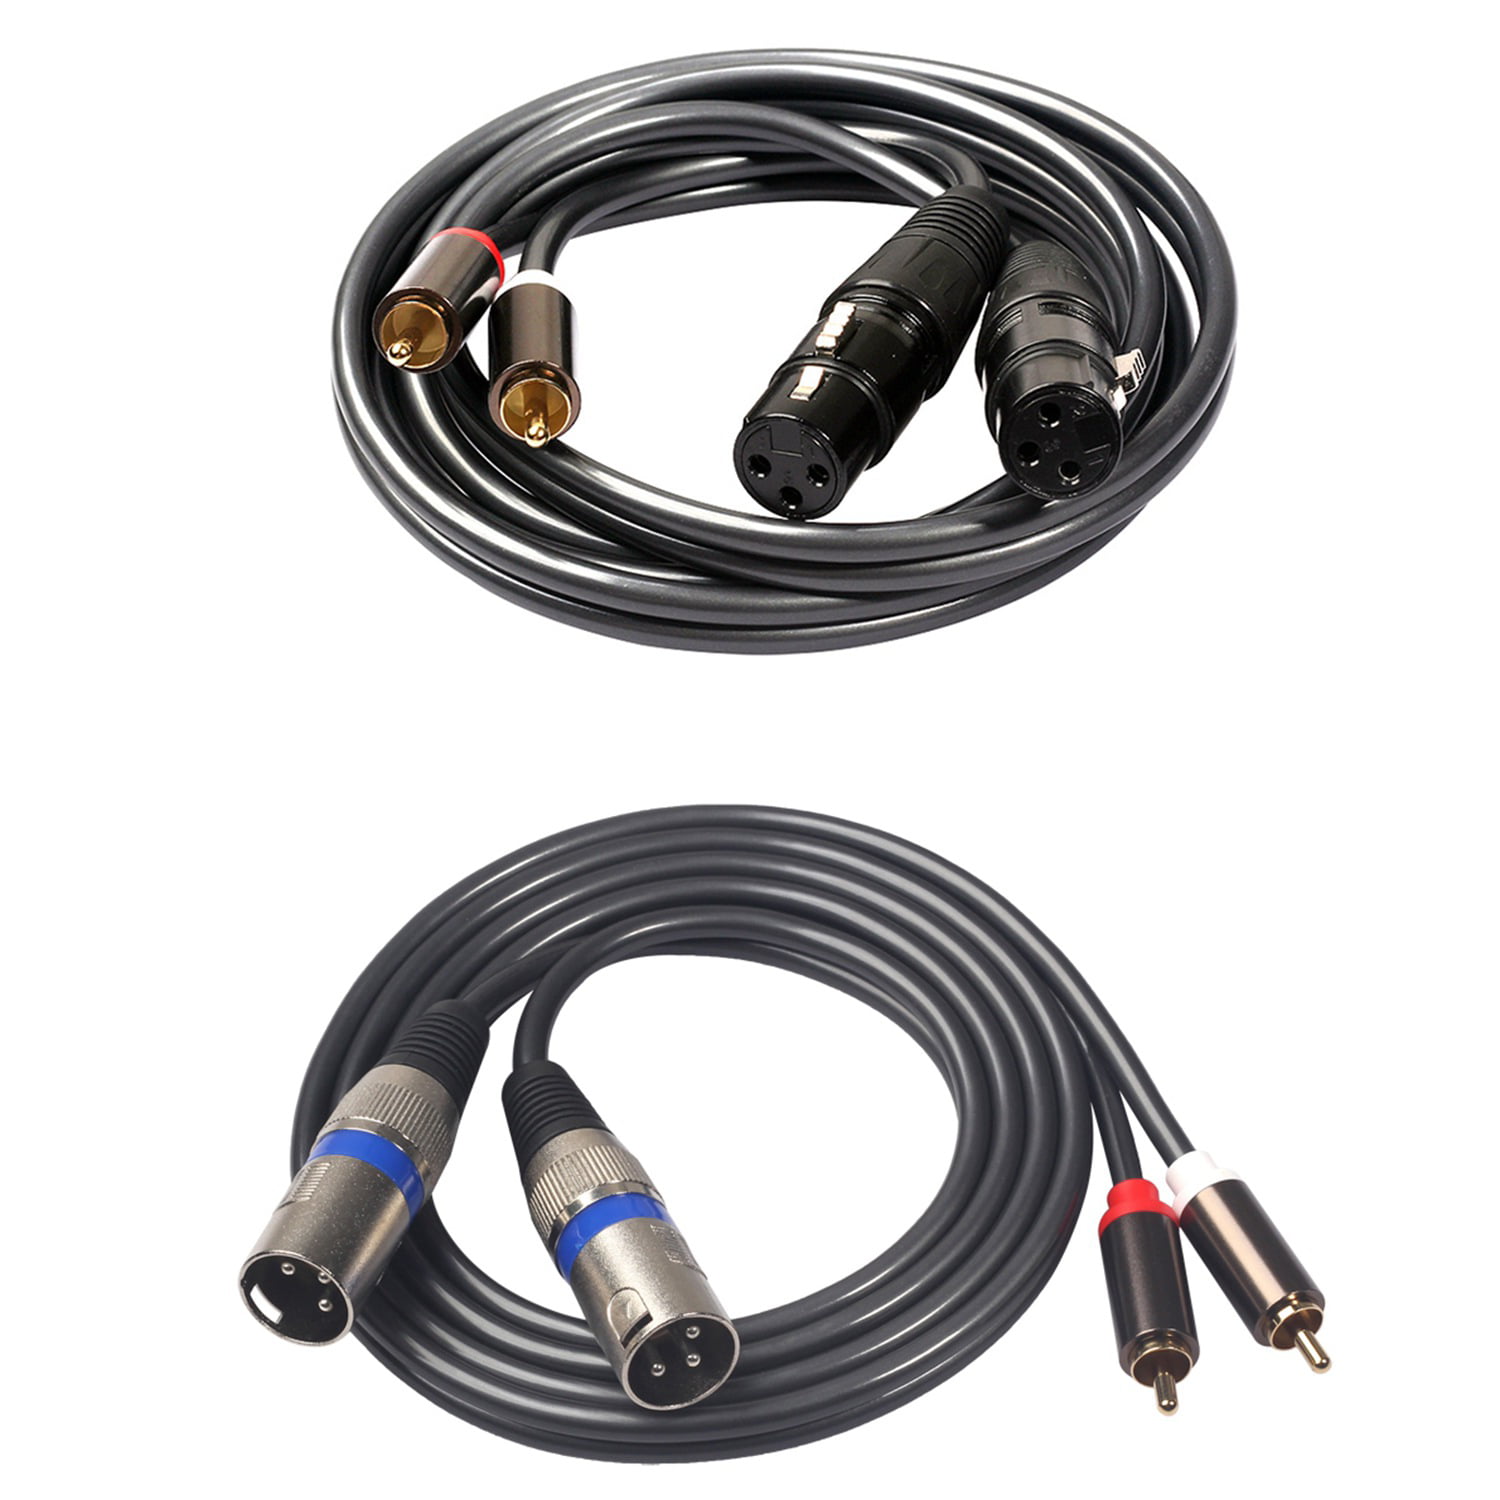 Double Jack 6.35 Mm 1/4 Inch Plug Double Rca Male Jack Audio Cable 1 Meter